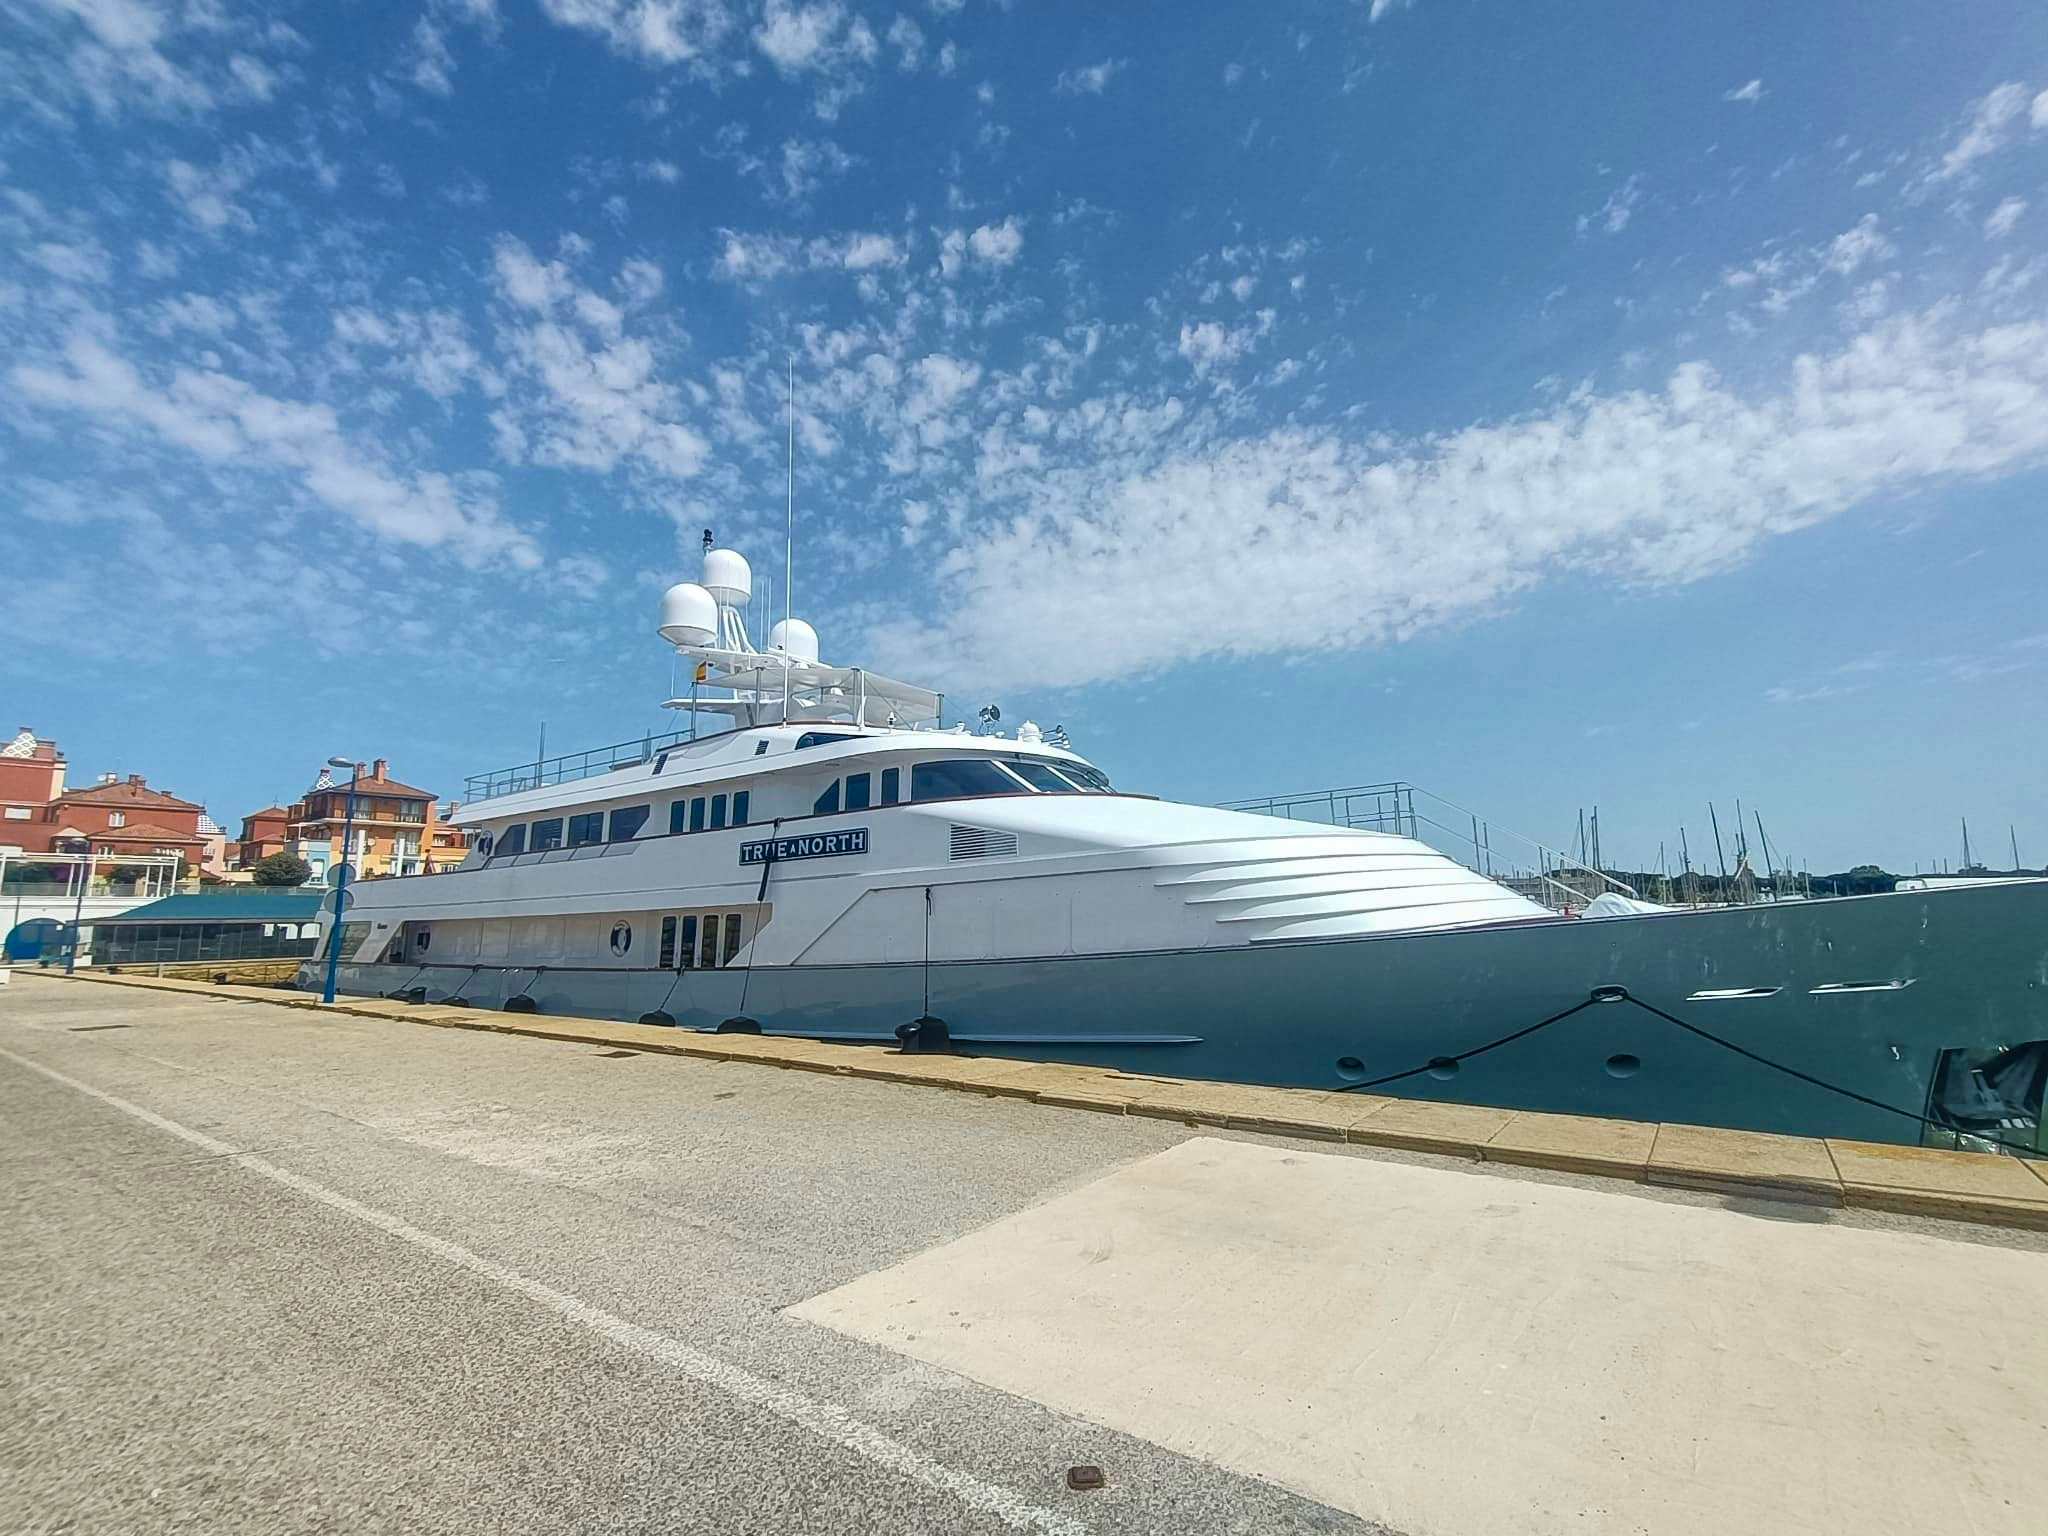 Lamaignere Shipping provides several days agent services to the yacht “True North” in Puerto Sherry.